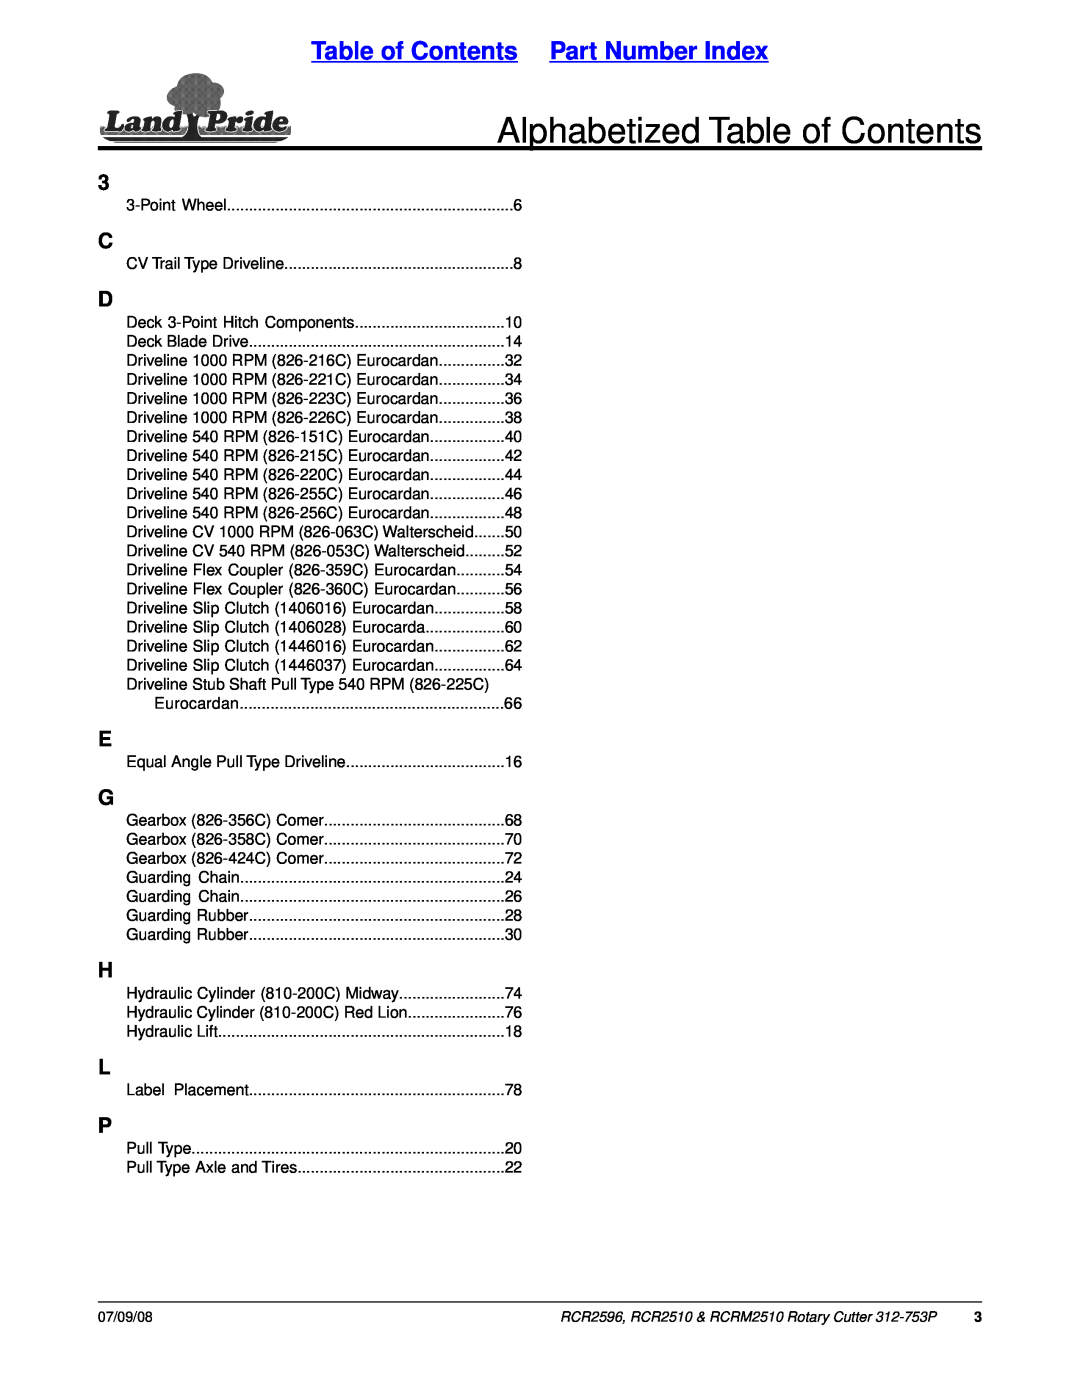 Land Pride RCR2596, RCRM2510, RCR2510 manual Alphabetized Table of Contents, Table of Contents Part Number Index 